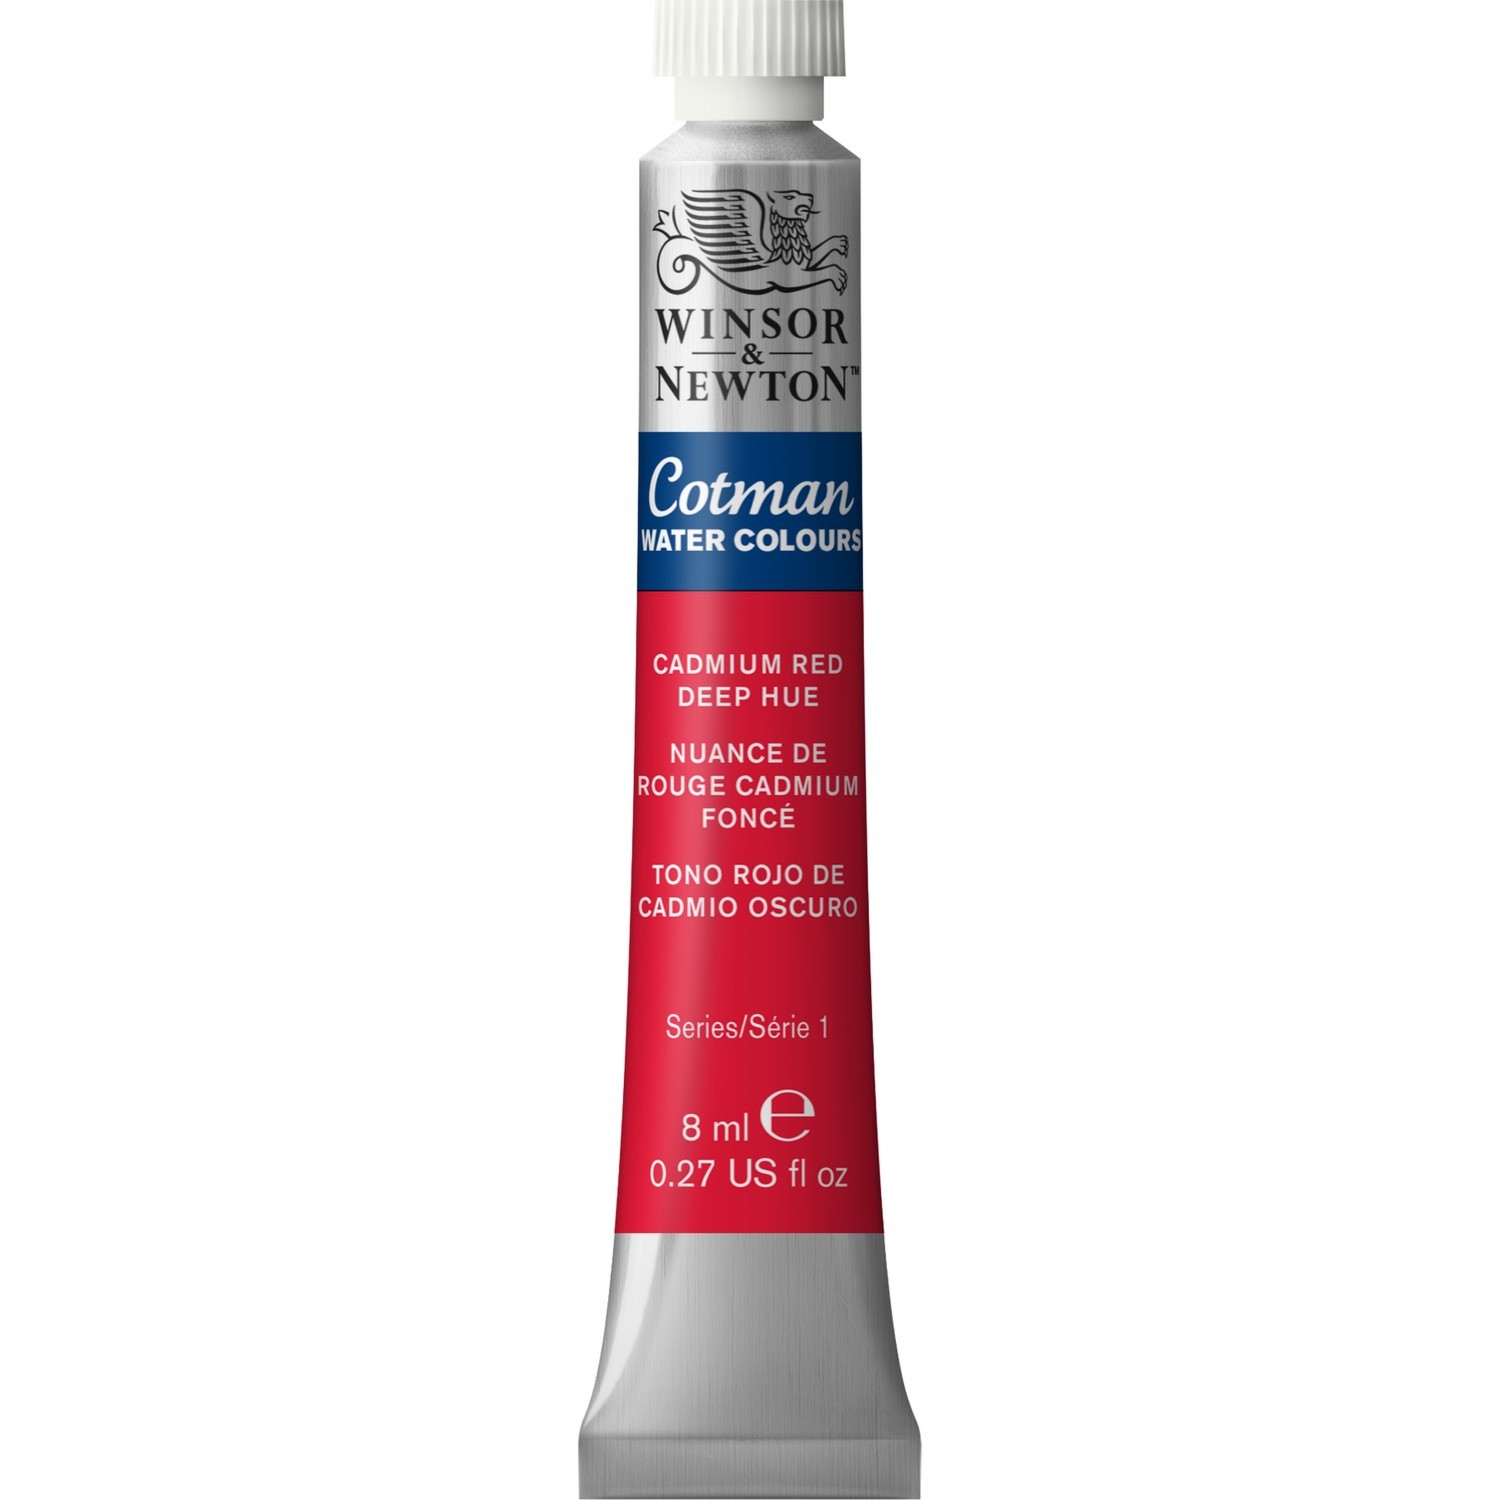 Winsor and Newton Cotman Watercolour Paint - Red Image 1